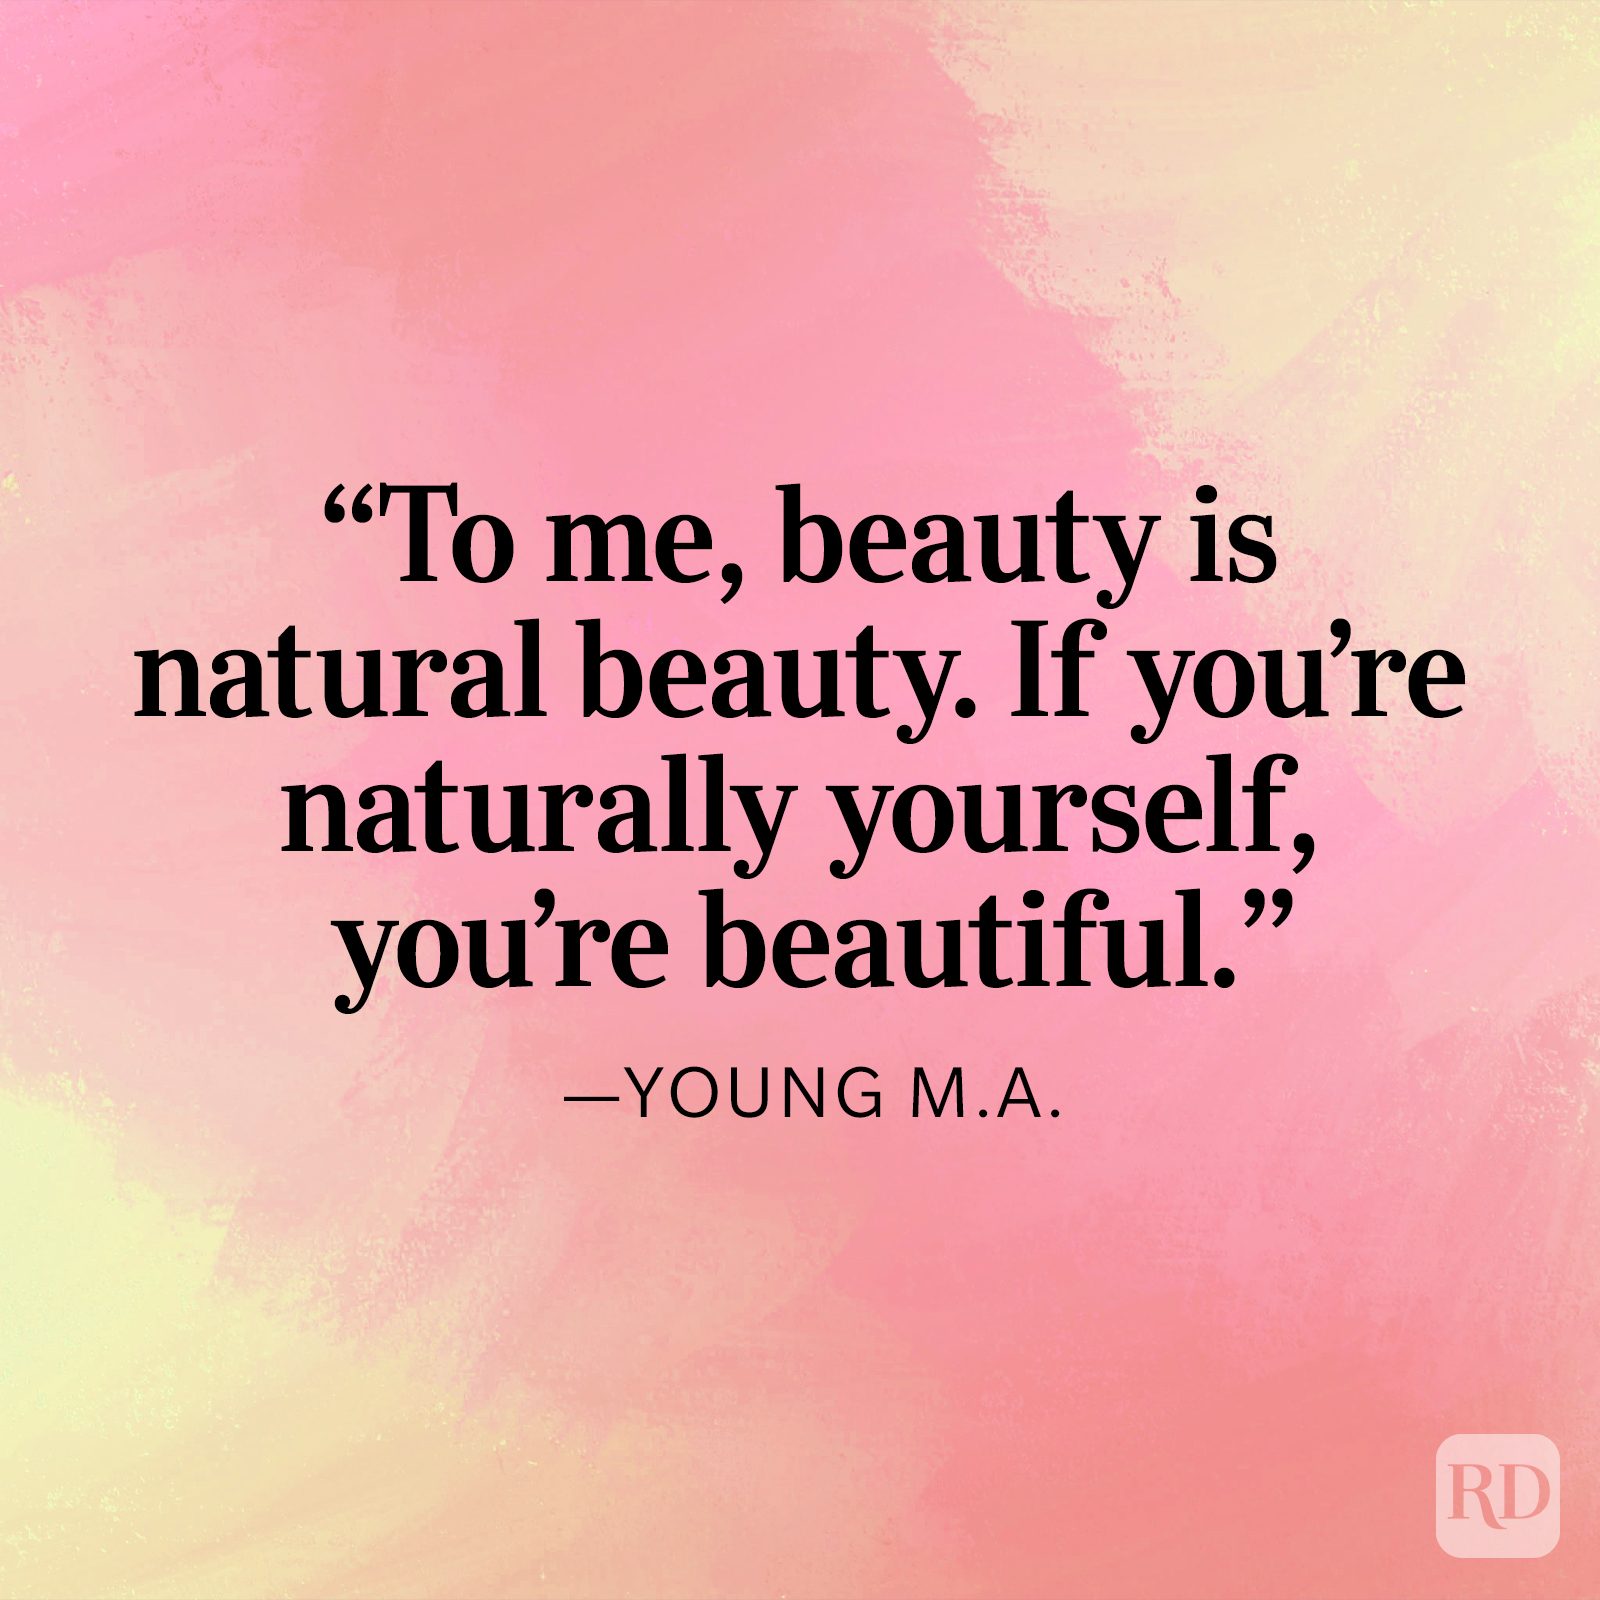 40 Ways to tell someone they are Beautiful!